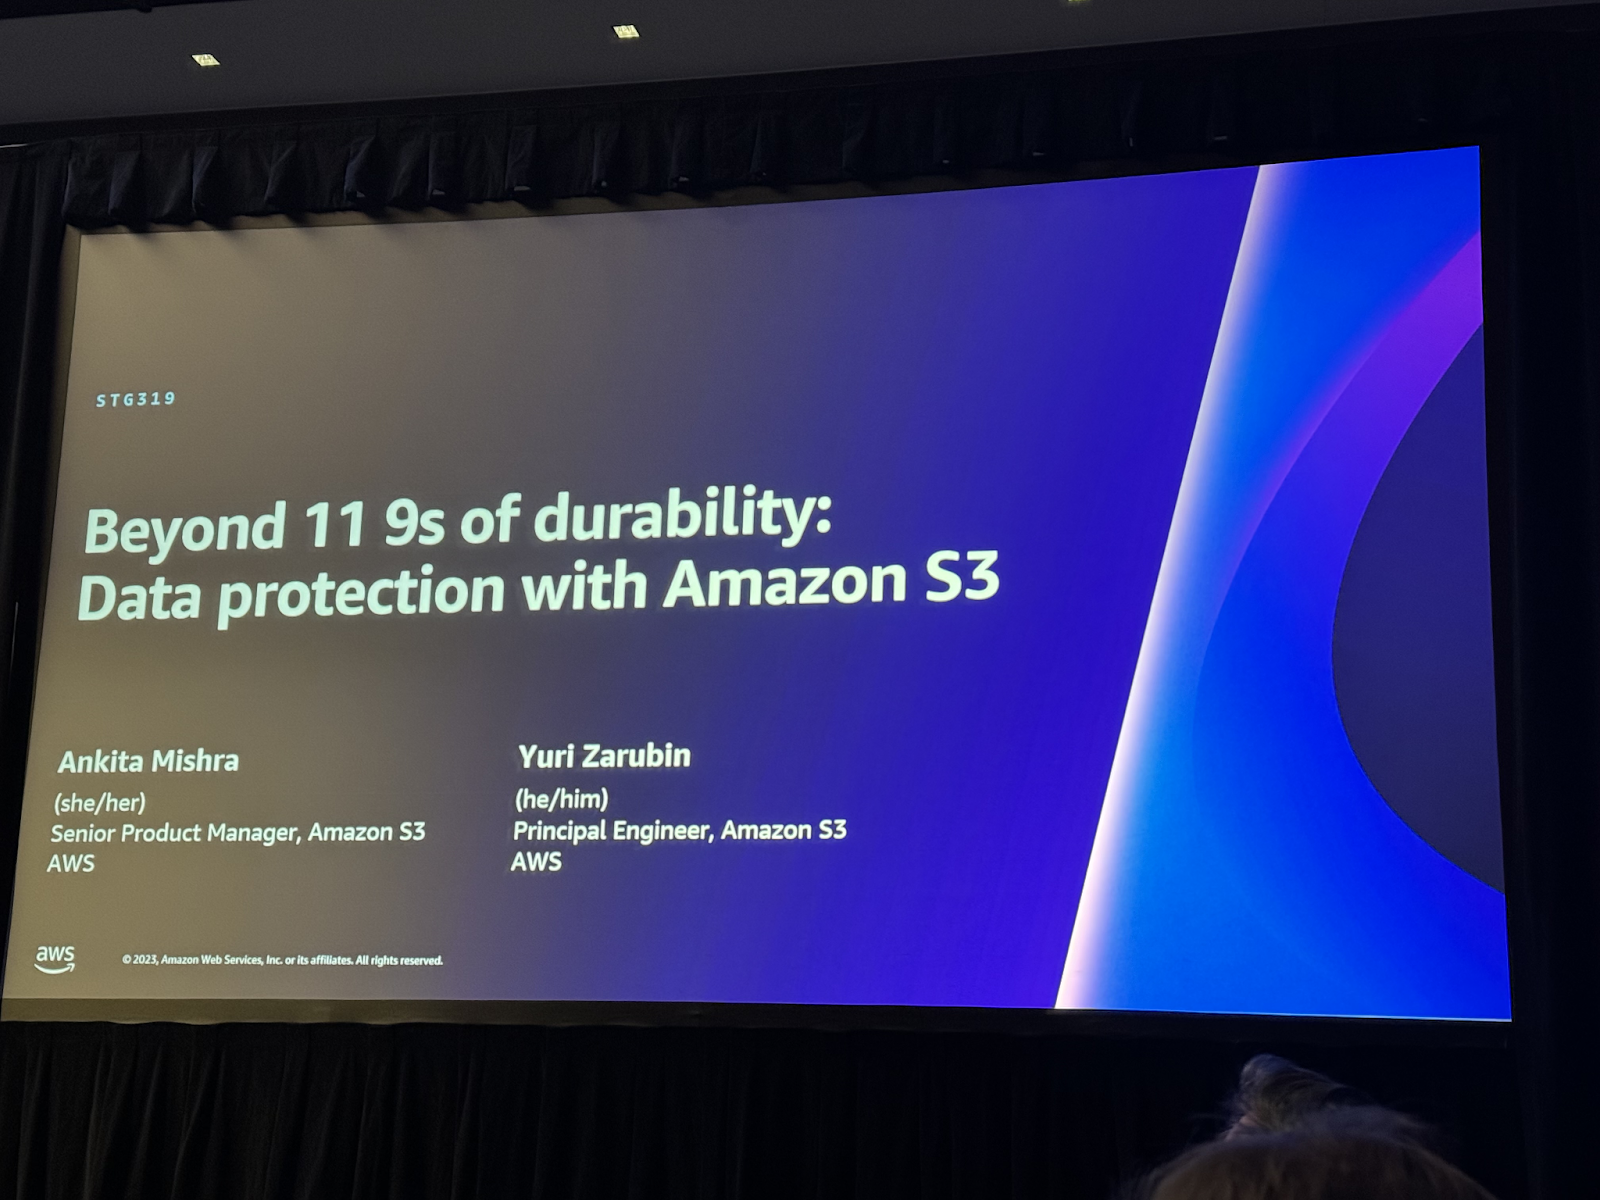 Beyond 11 9s of durability: Data protection with Amazon S3